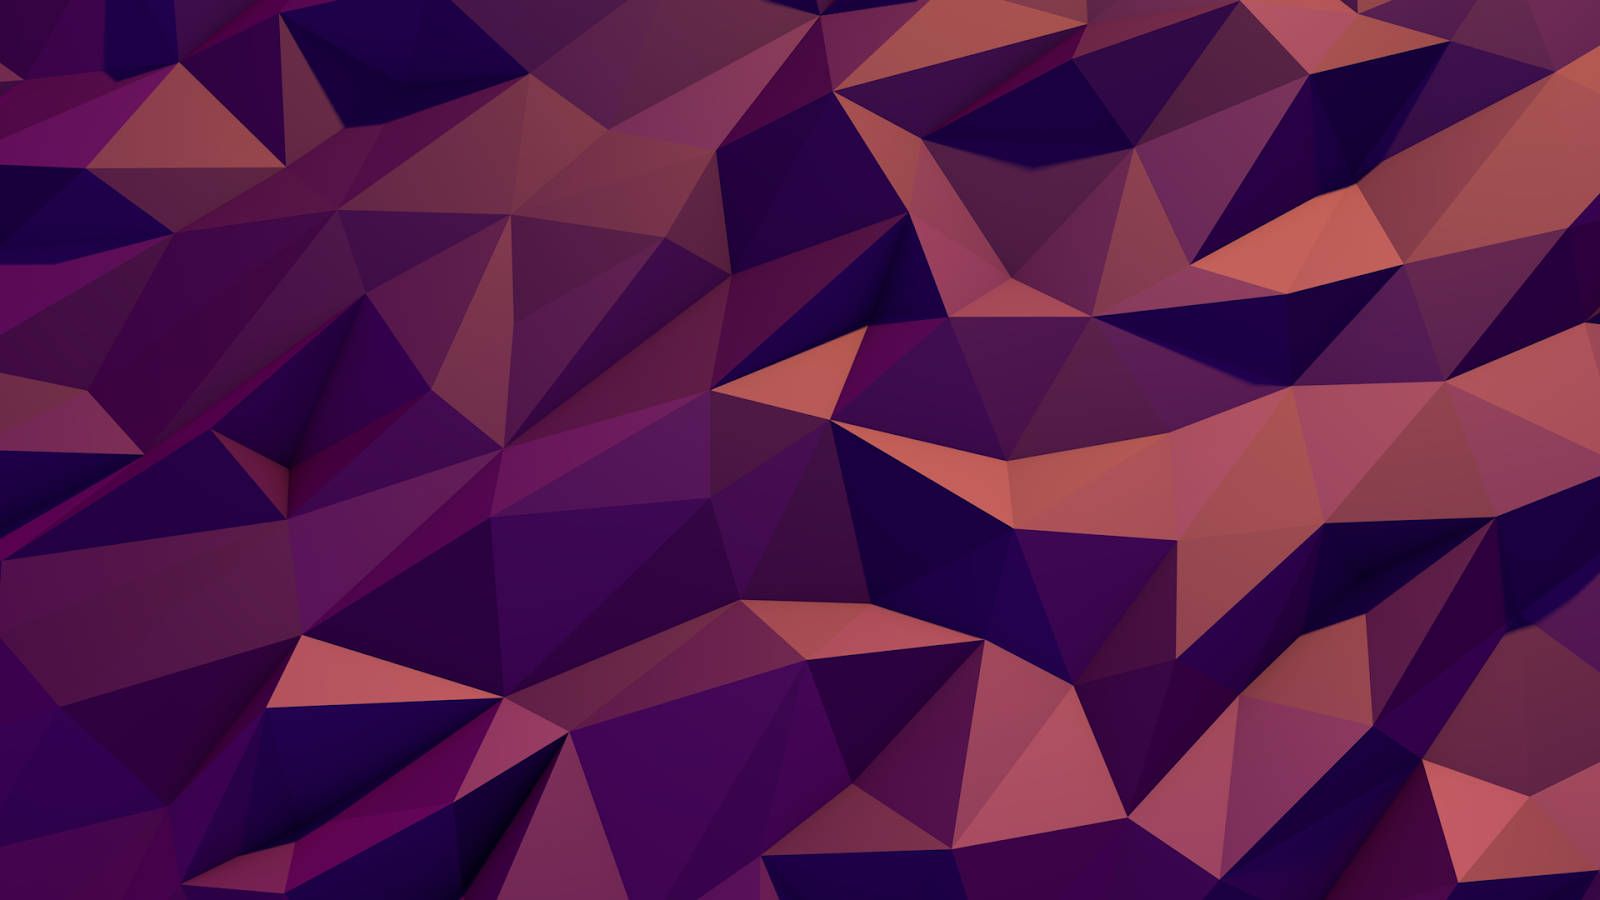 A purple and pink low poly background - Low poly